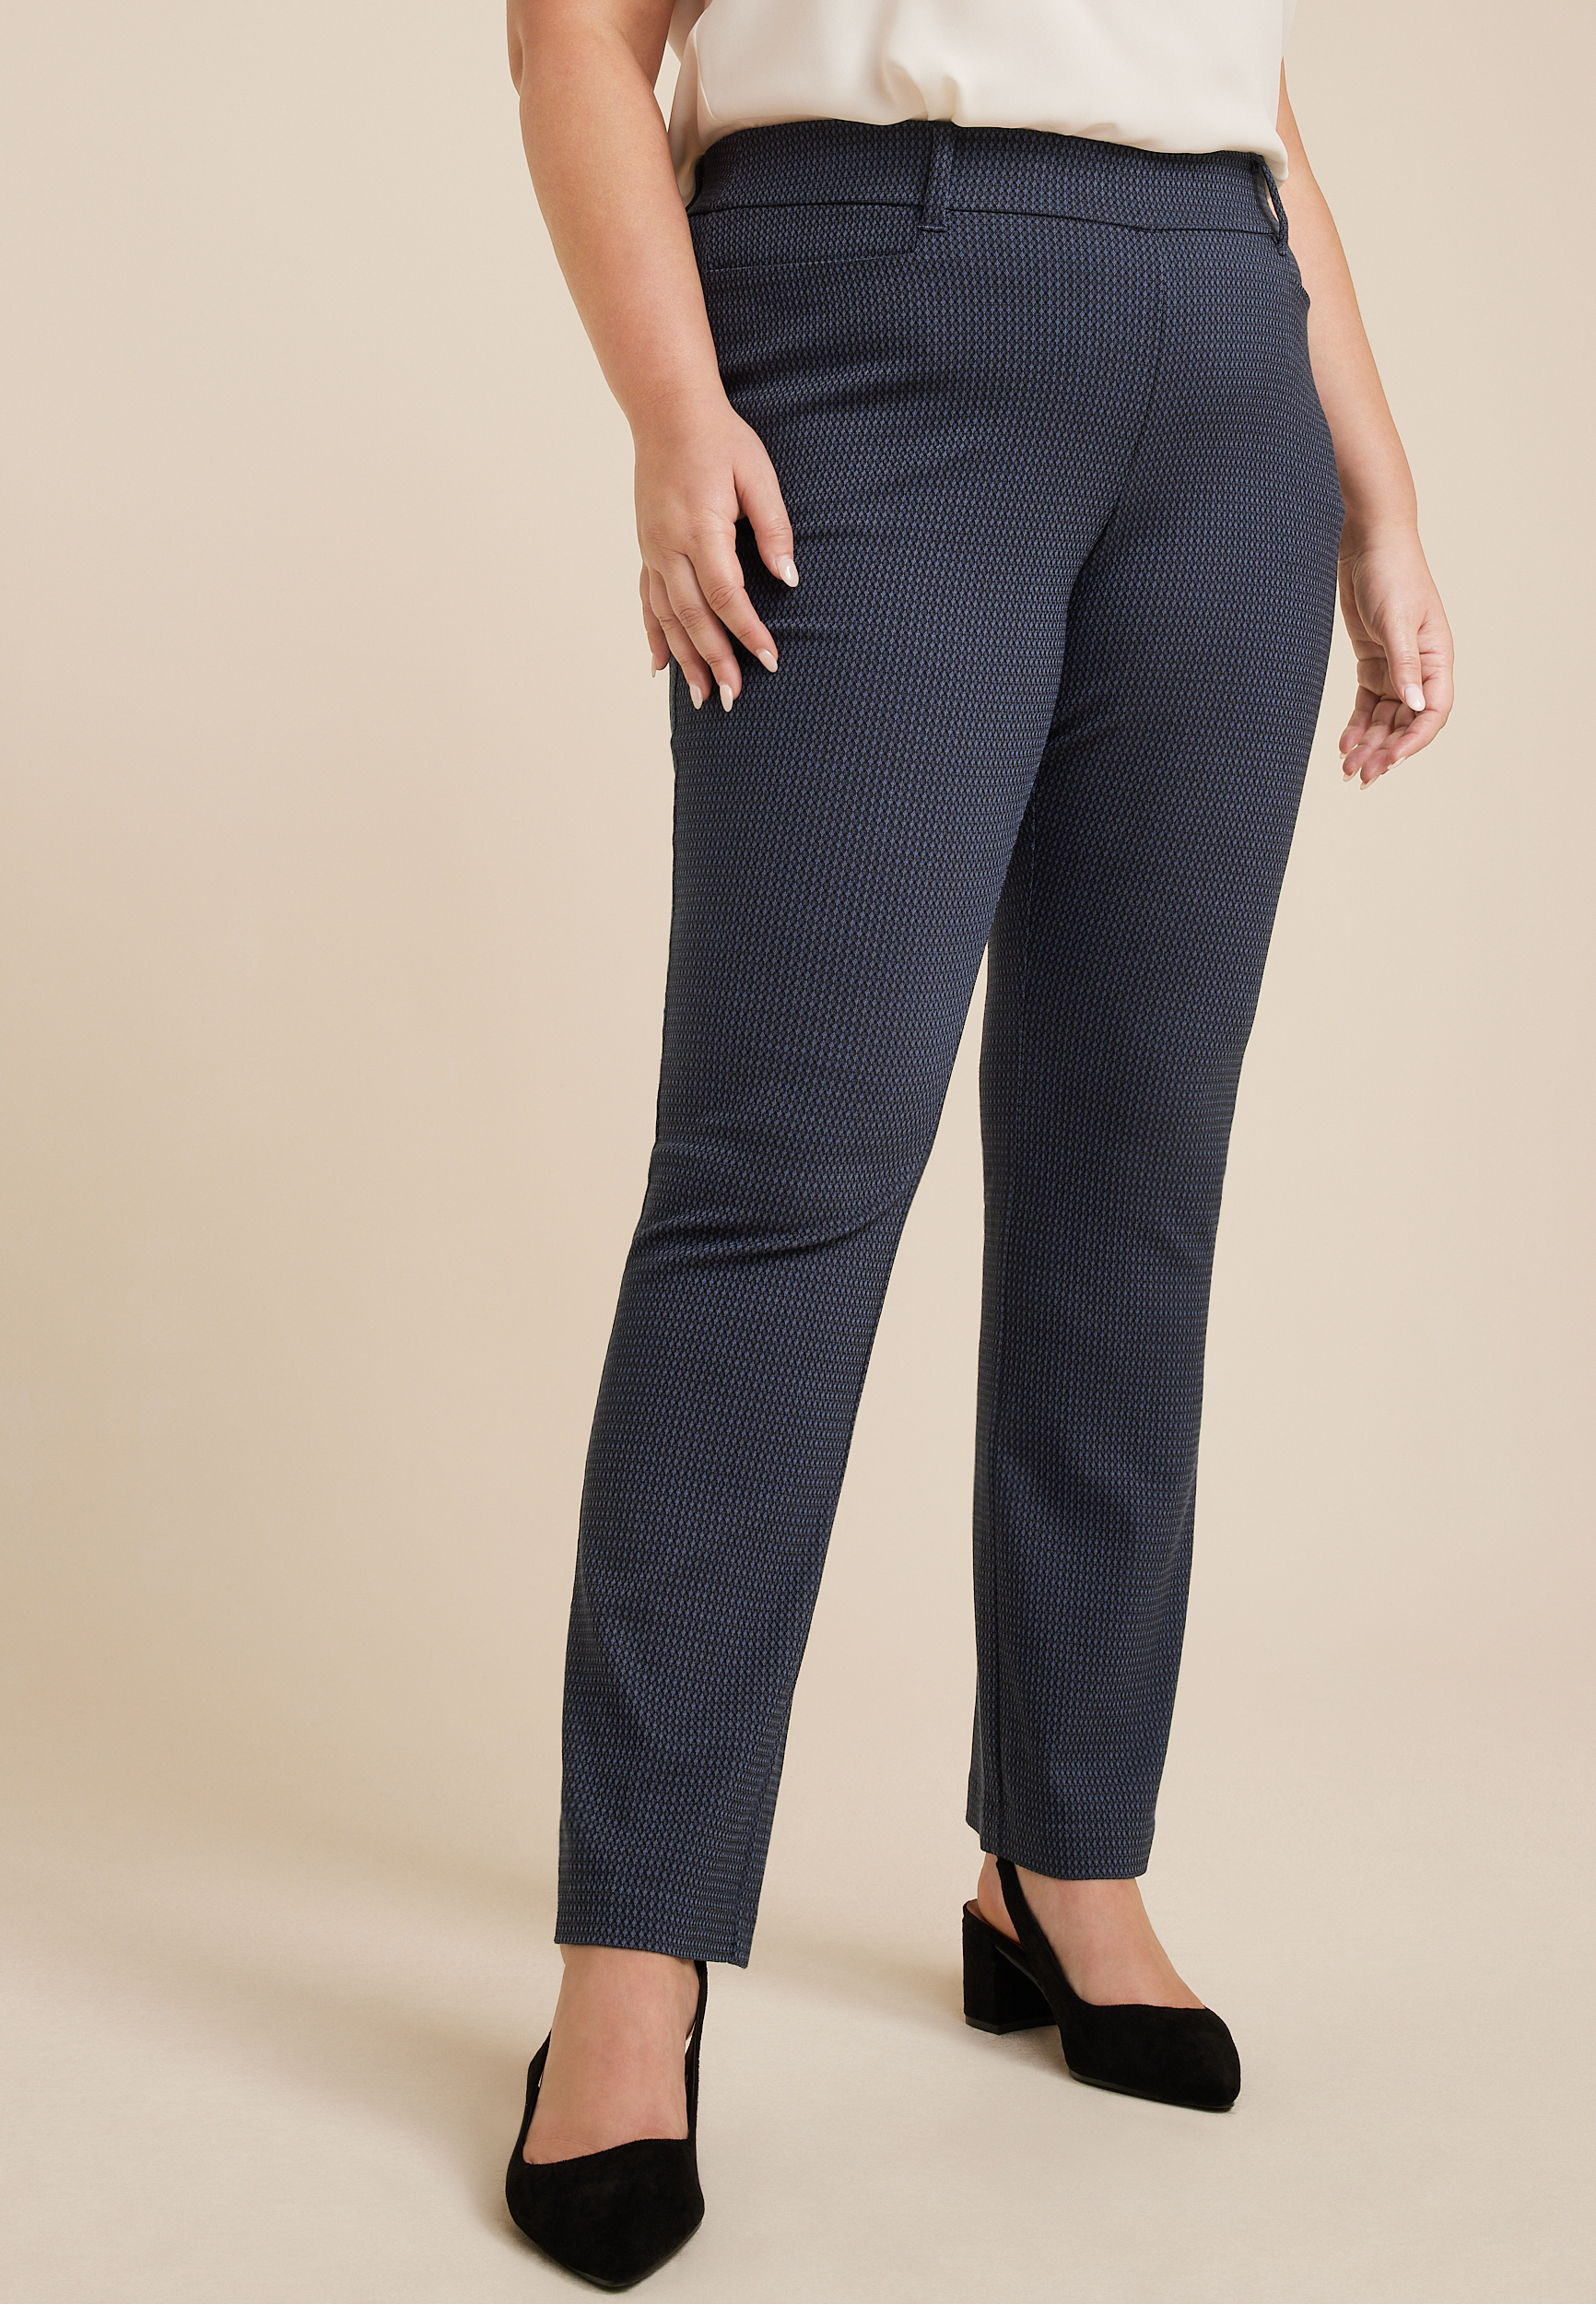 maurices - Get a leg up on Monday with versatile bengaline pants that go  from work to wherever without missing a beat. Shop bottoms:   Shop plus bottoms:   #maurices #discovermaurices #fashion #